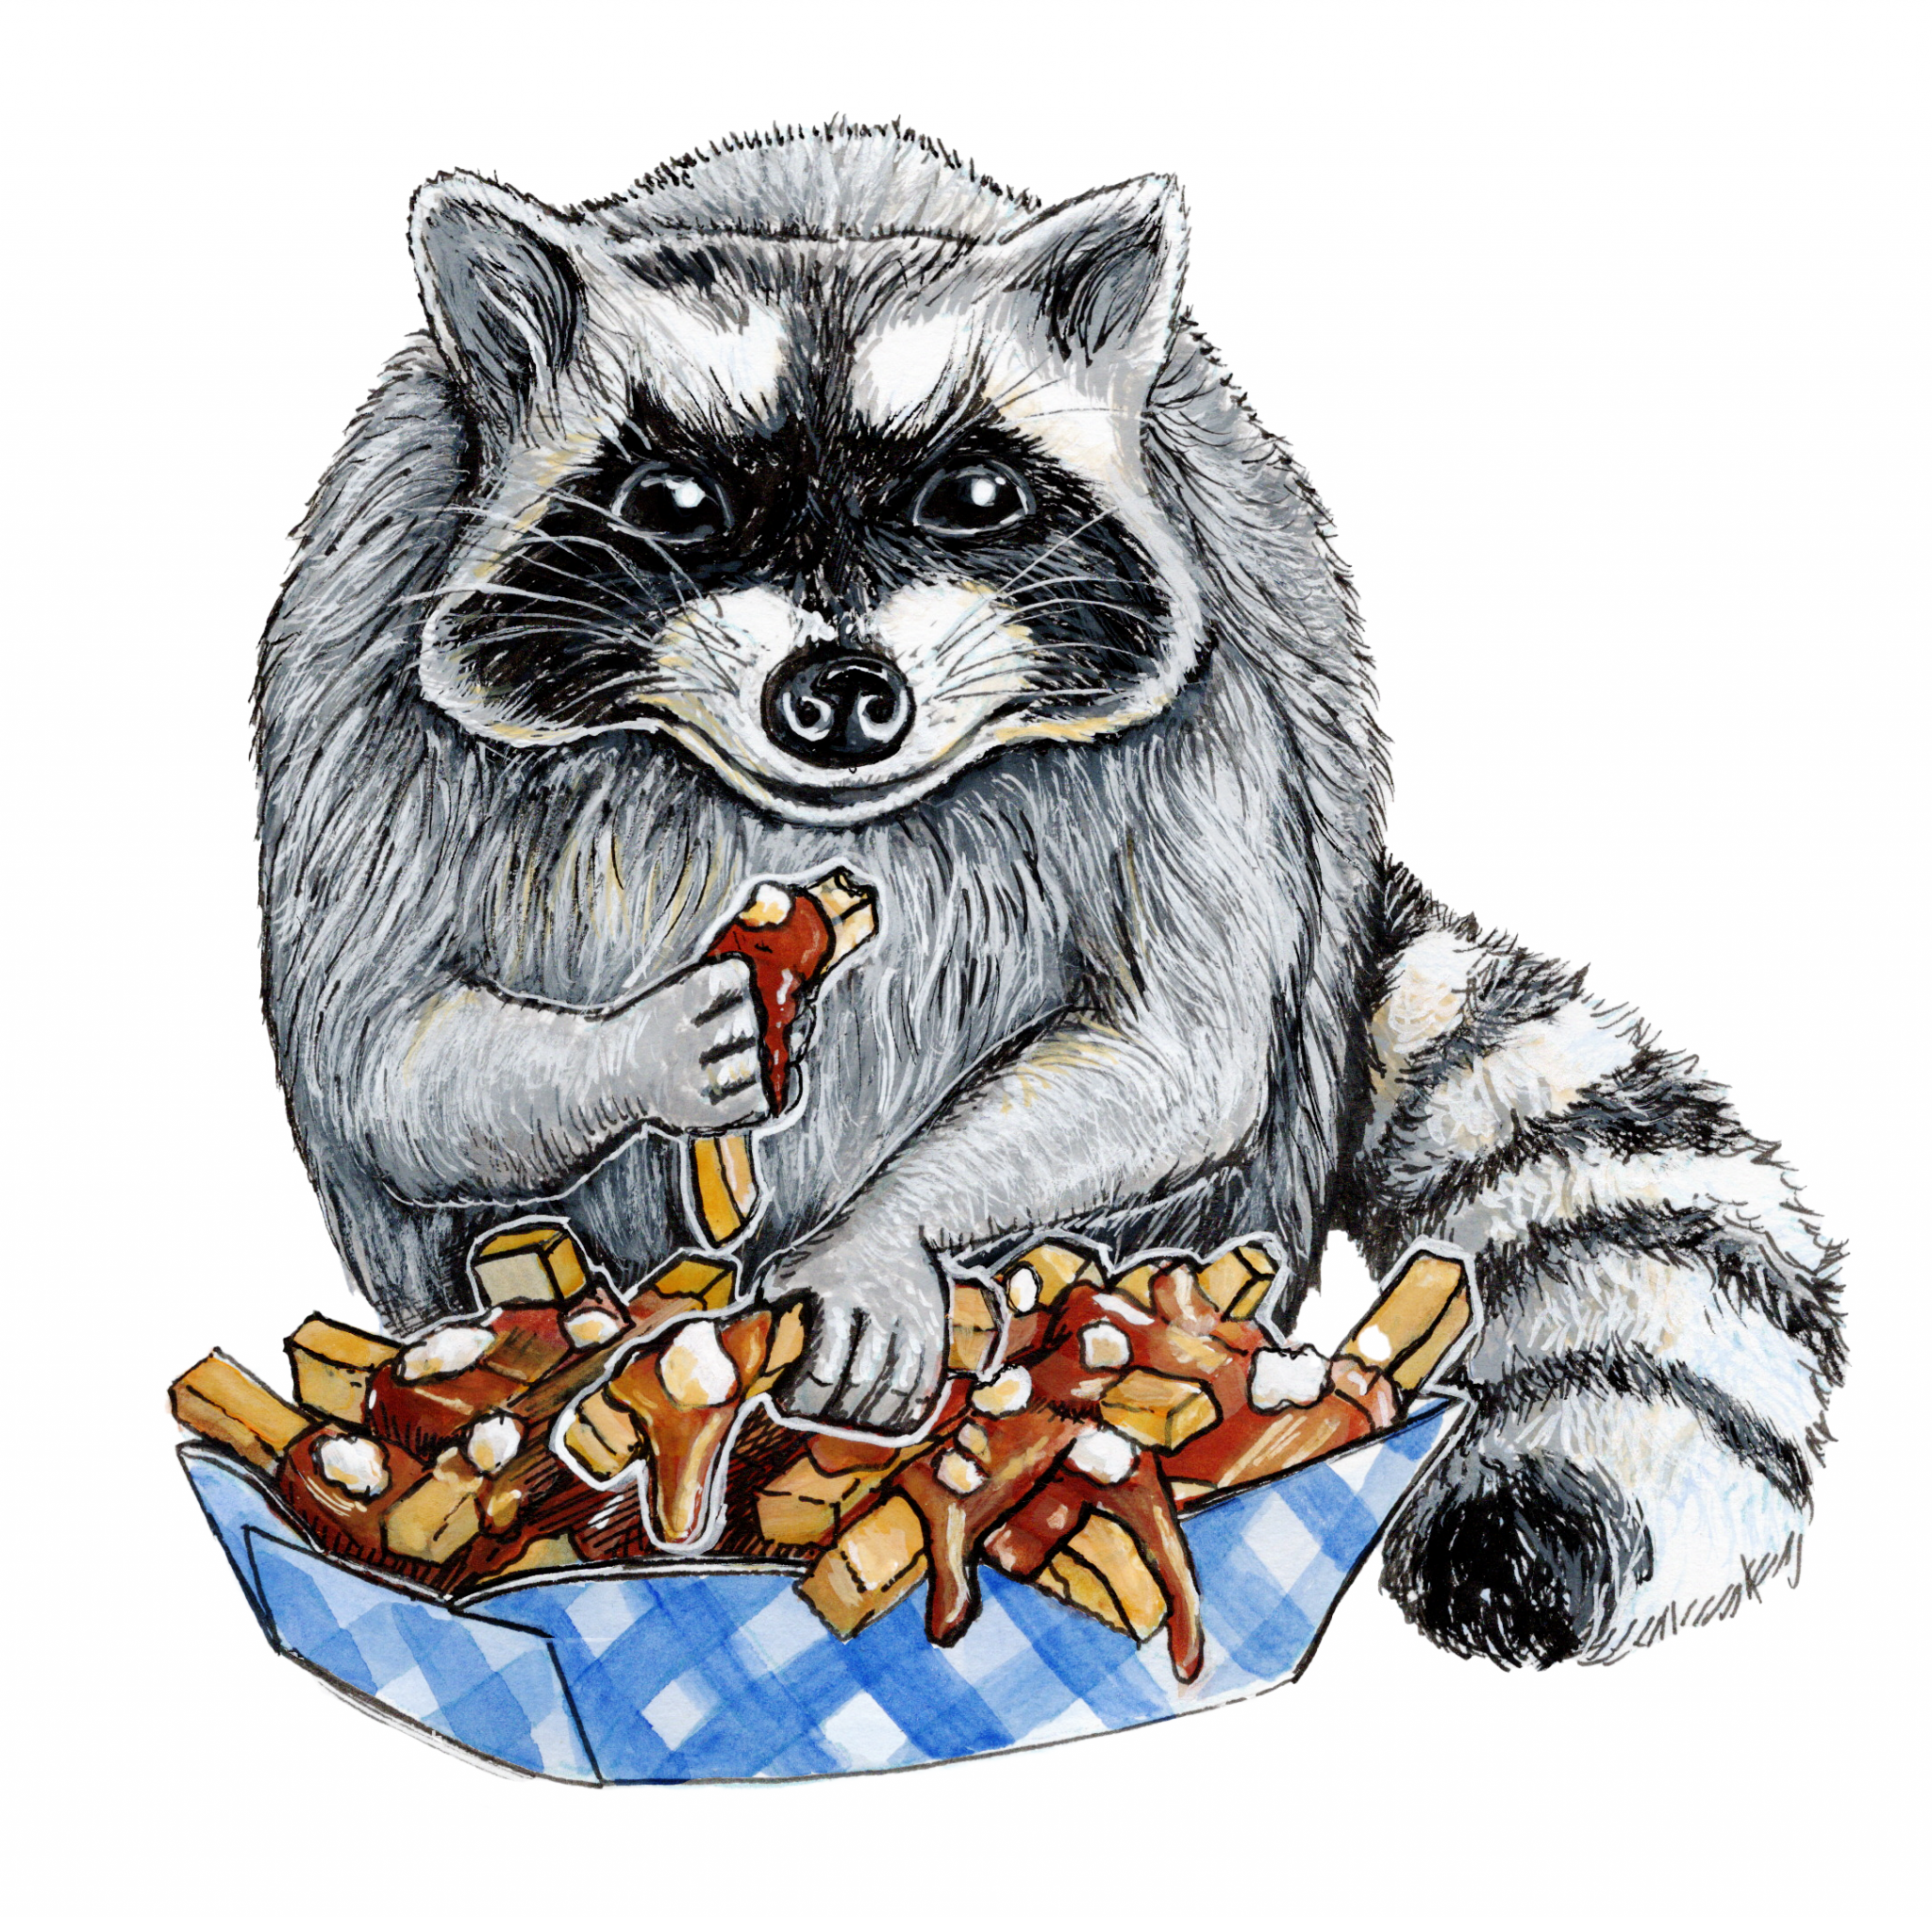 Illustration of a cheeky raccoon eating poutine out of a blue paper basket.